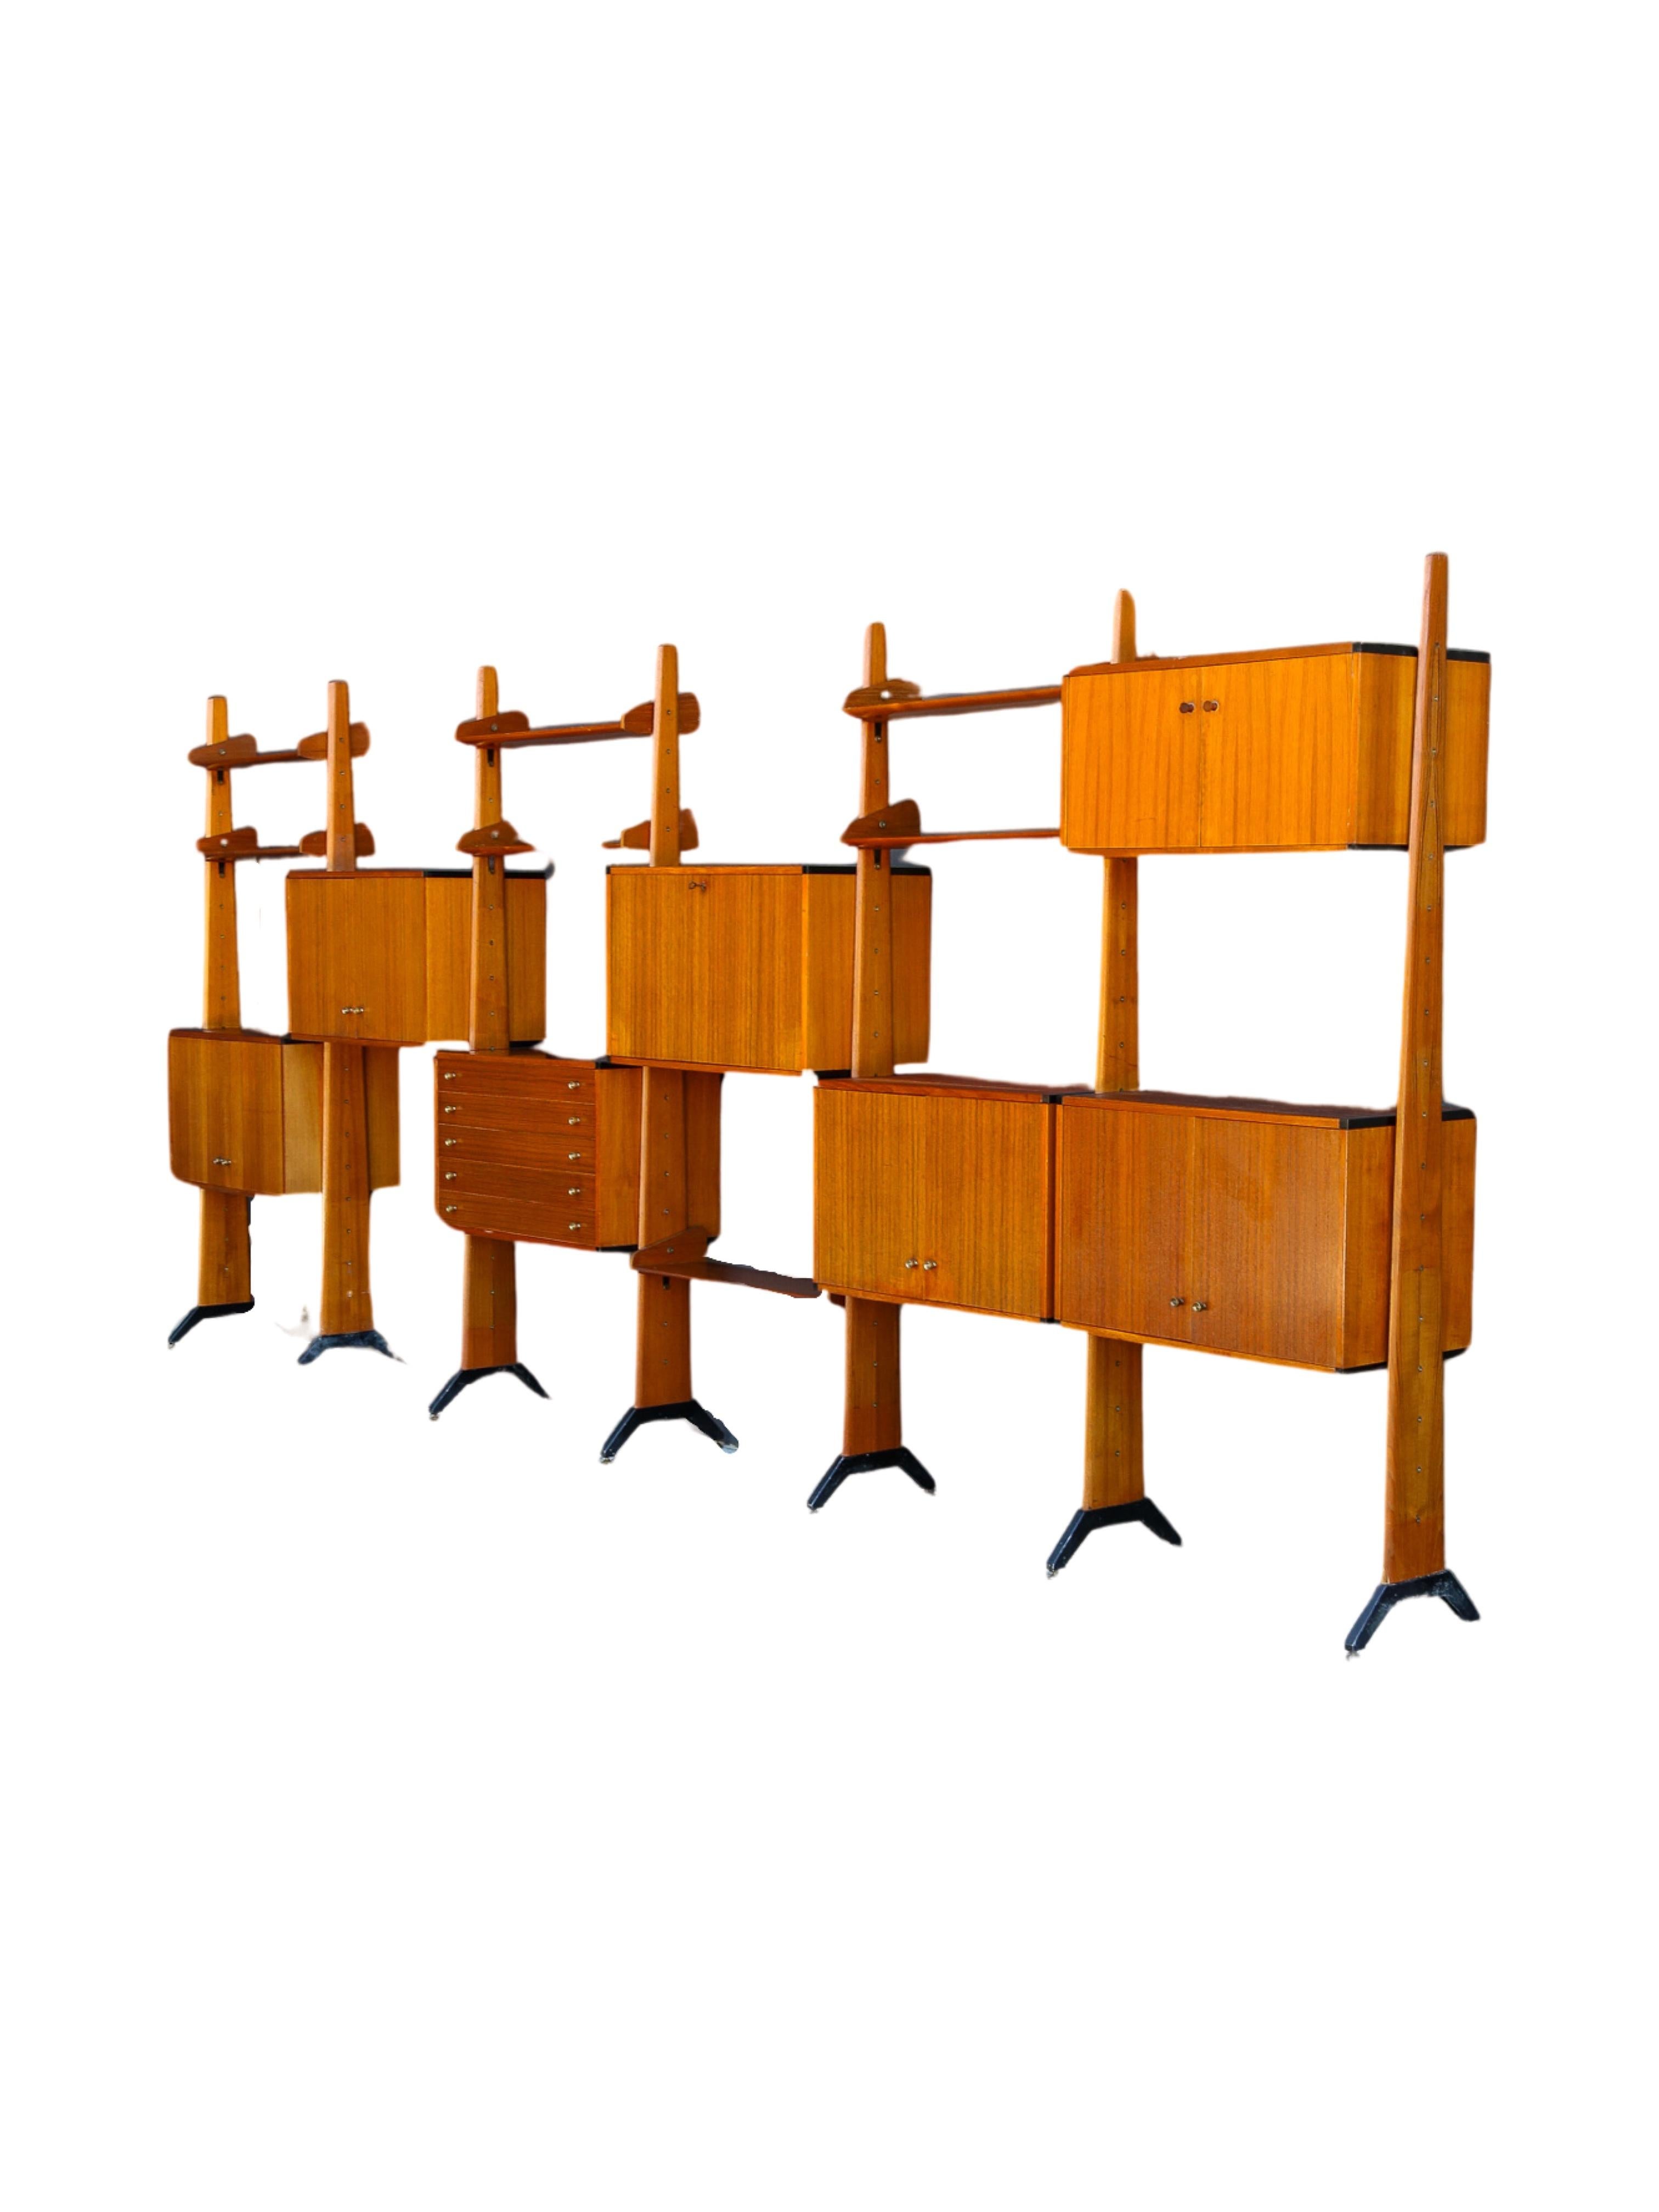 Italian Mid Century Modern bookcase by AV Arredamenti Contemporanei 1960s. The structure is made of solid and veneered teak wood with adjustable brass feet. It has one drawers module, nine cabinet modules and seven shelves that you can place as you